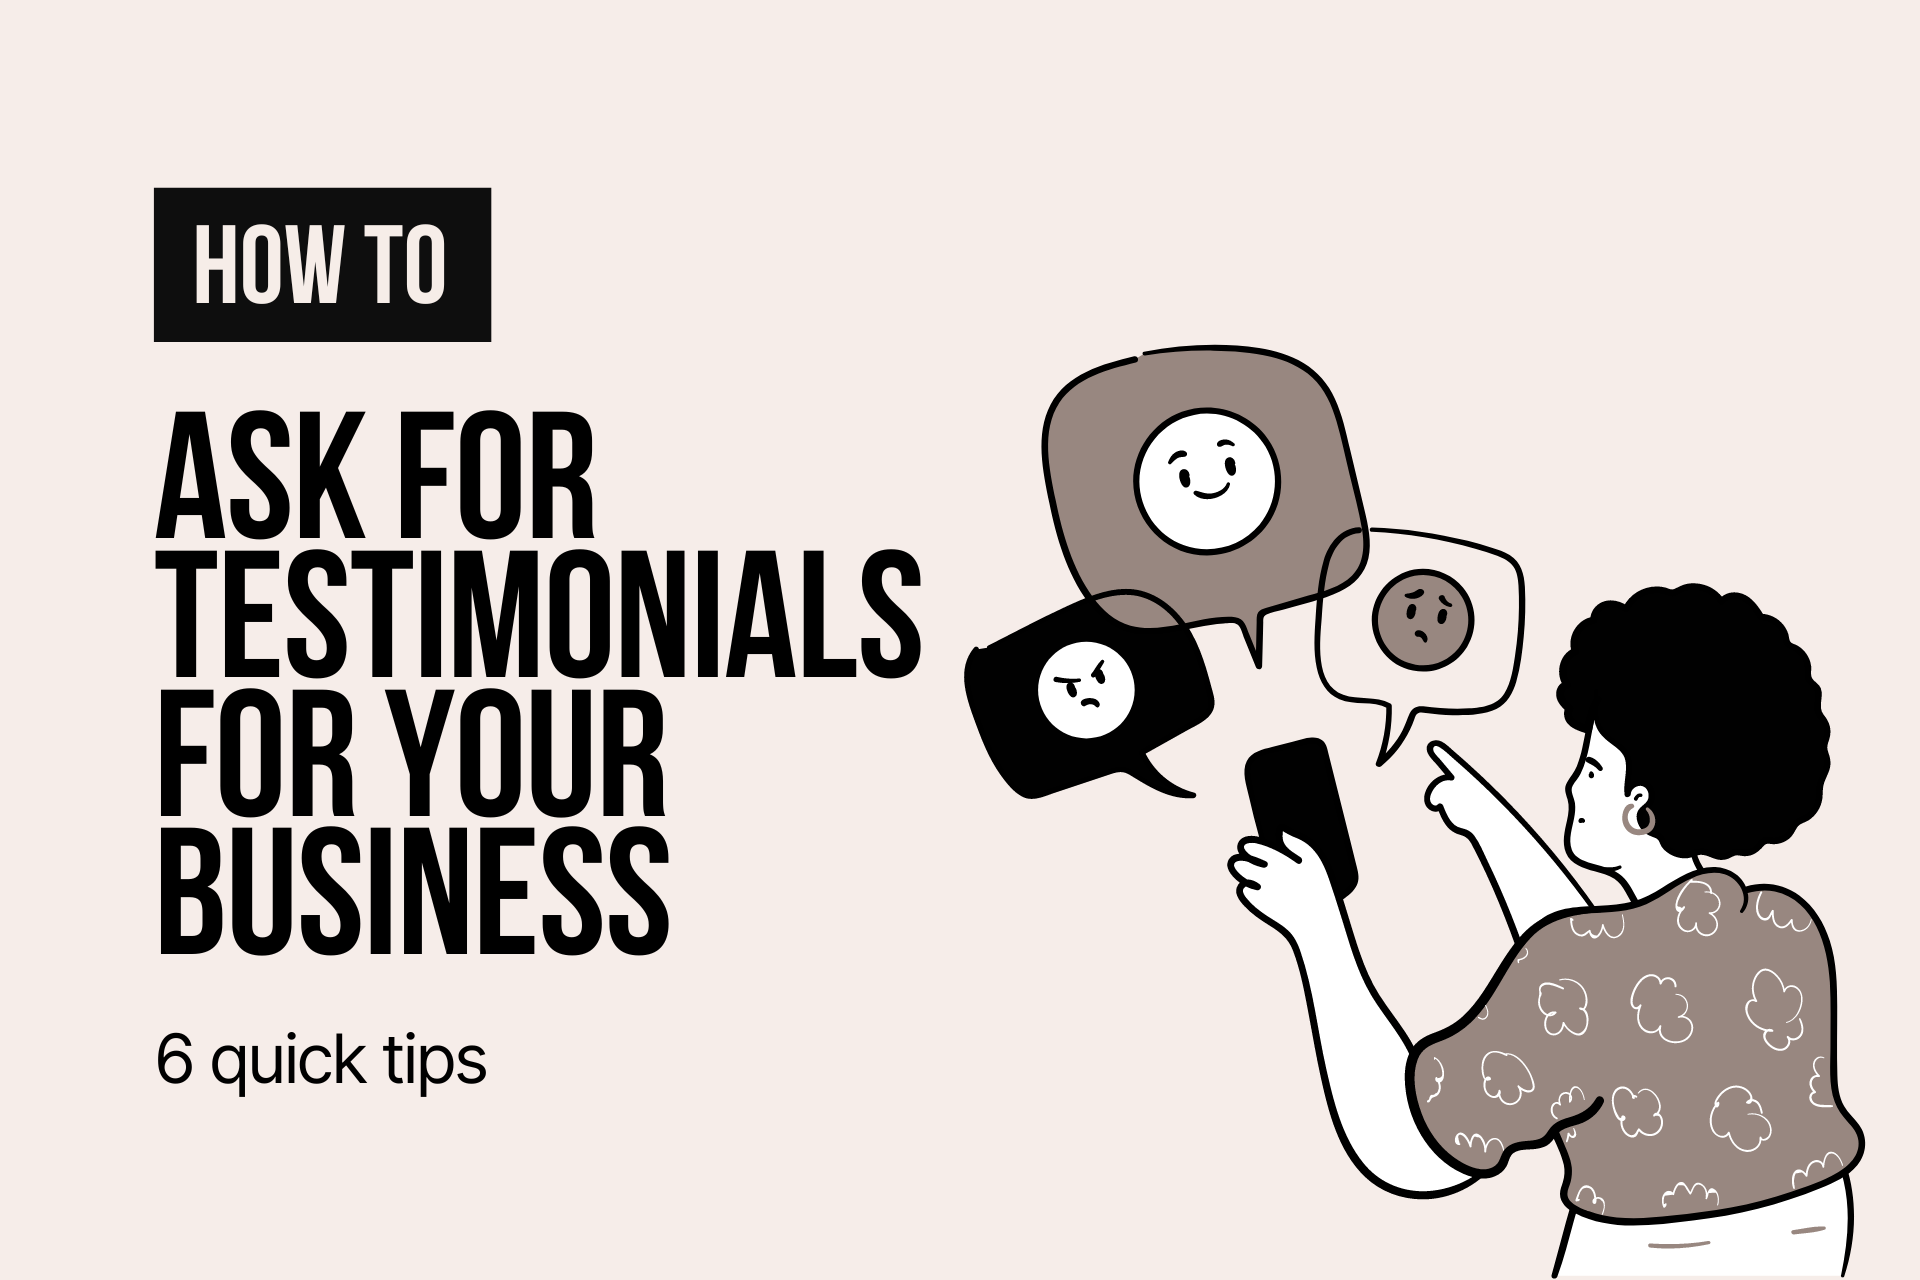 cover image that says "how to ask for testimonials for your business 6 quick tips" along with an illustration of a woman holding phone and happy and angry face expressions